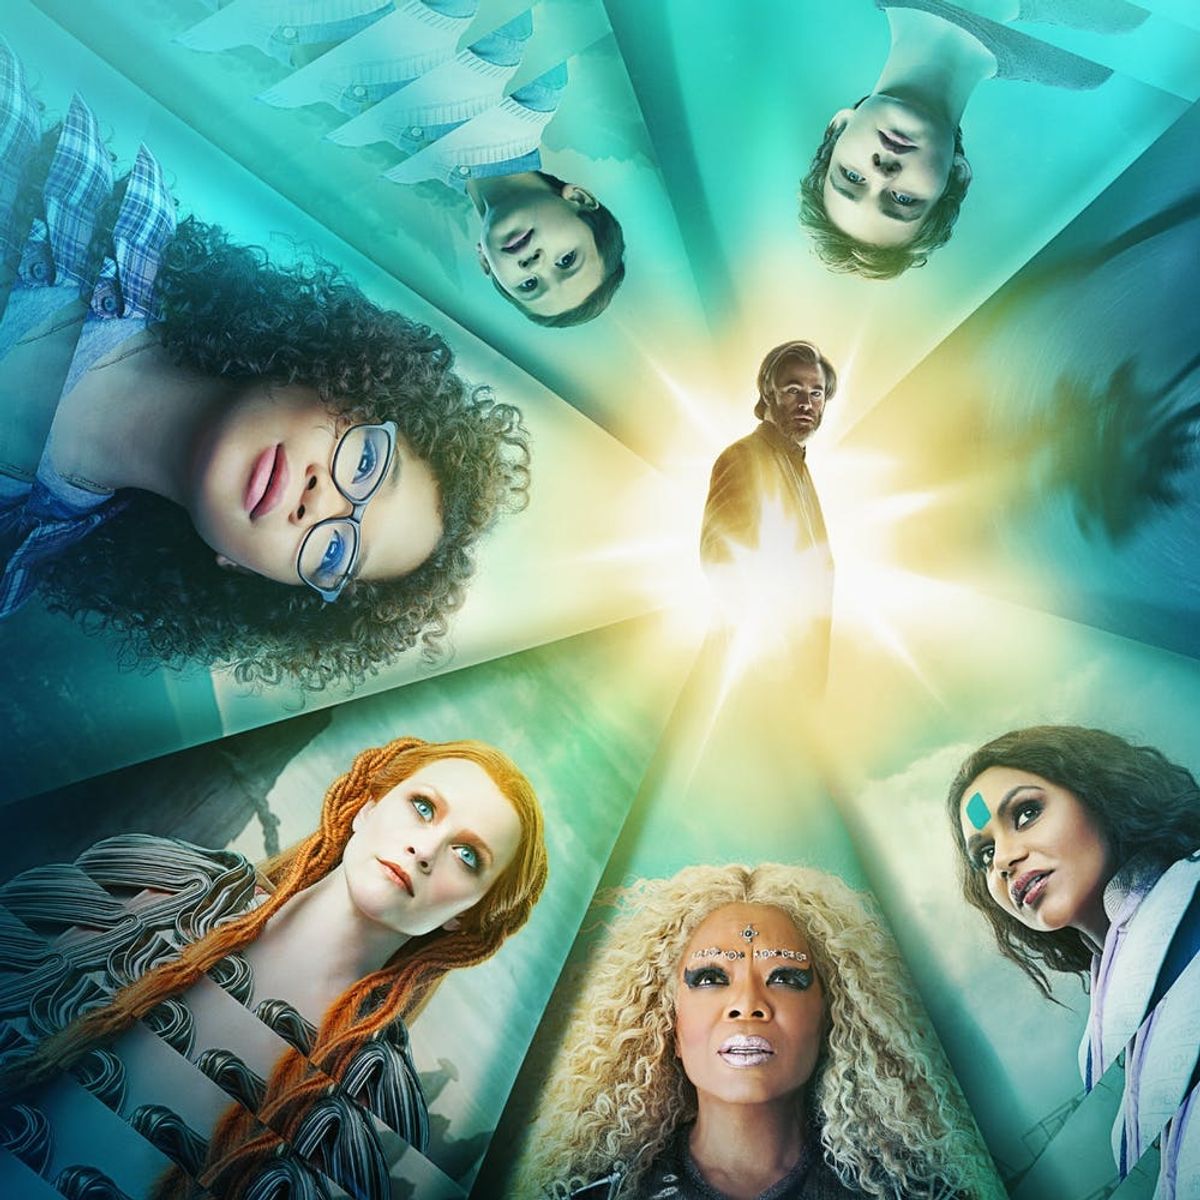 Time’s ‘A Wrinkle in Time’ Cover Has Us So Excited for 2018